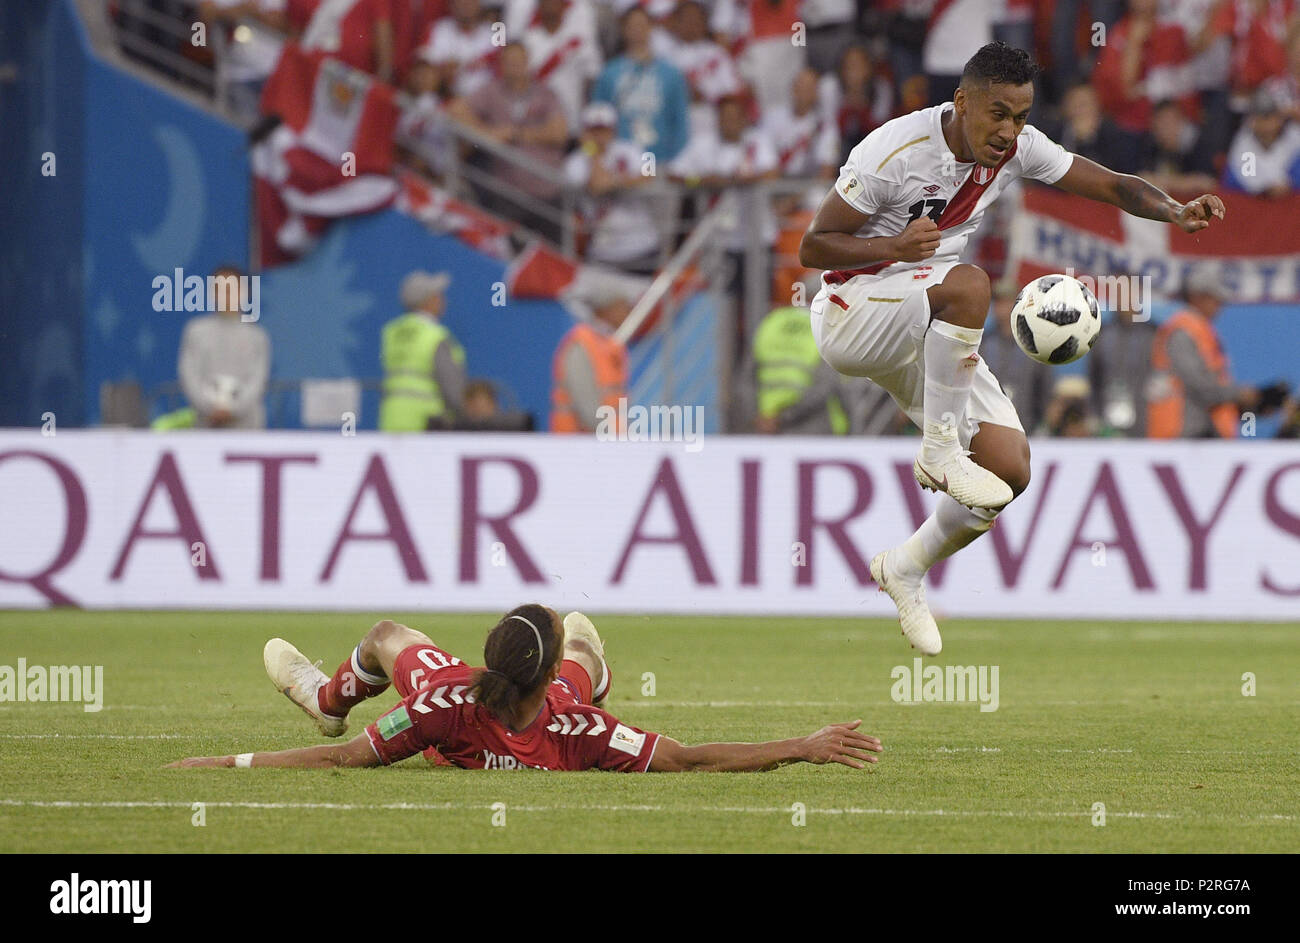 Saransk, Russia. 16th June, 2018. Renato Tapia (R) of Peru breaks through with the ball during a group C match between Peru and Denmark at the 2018 FIFA World Cup in Saransk, Russia, June 16, 2018. Credit: Lui Siu Wai/Xinhua/Alamy Live News Stock Photo